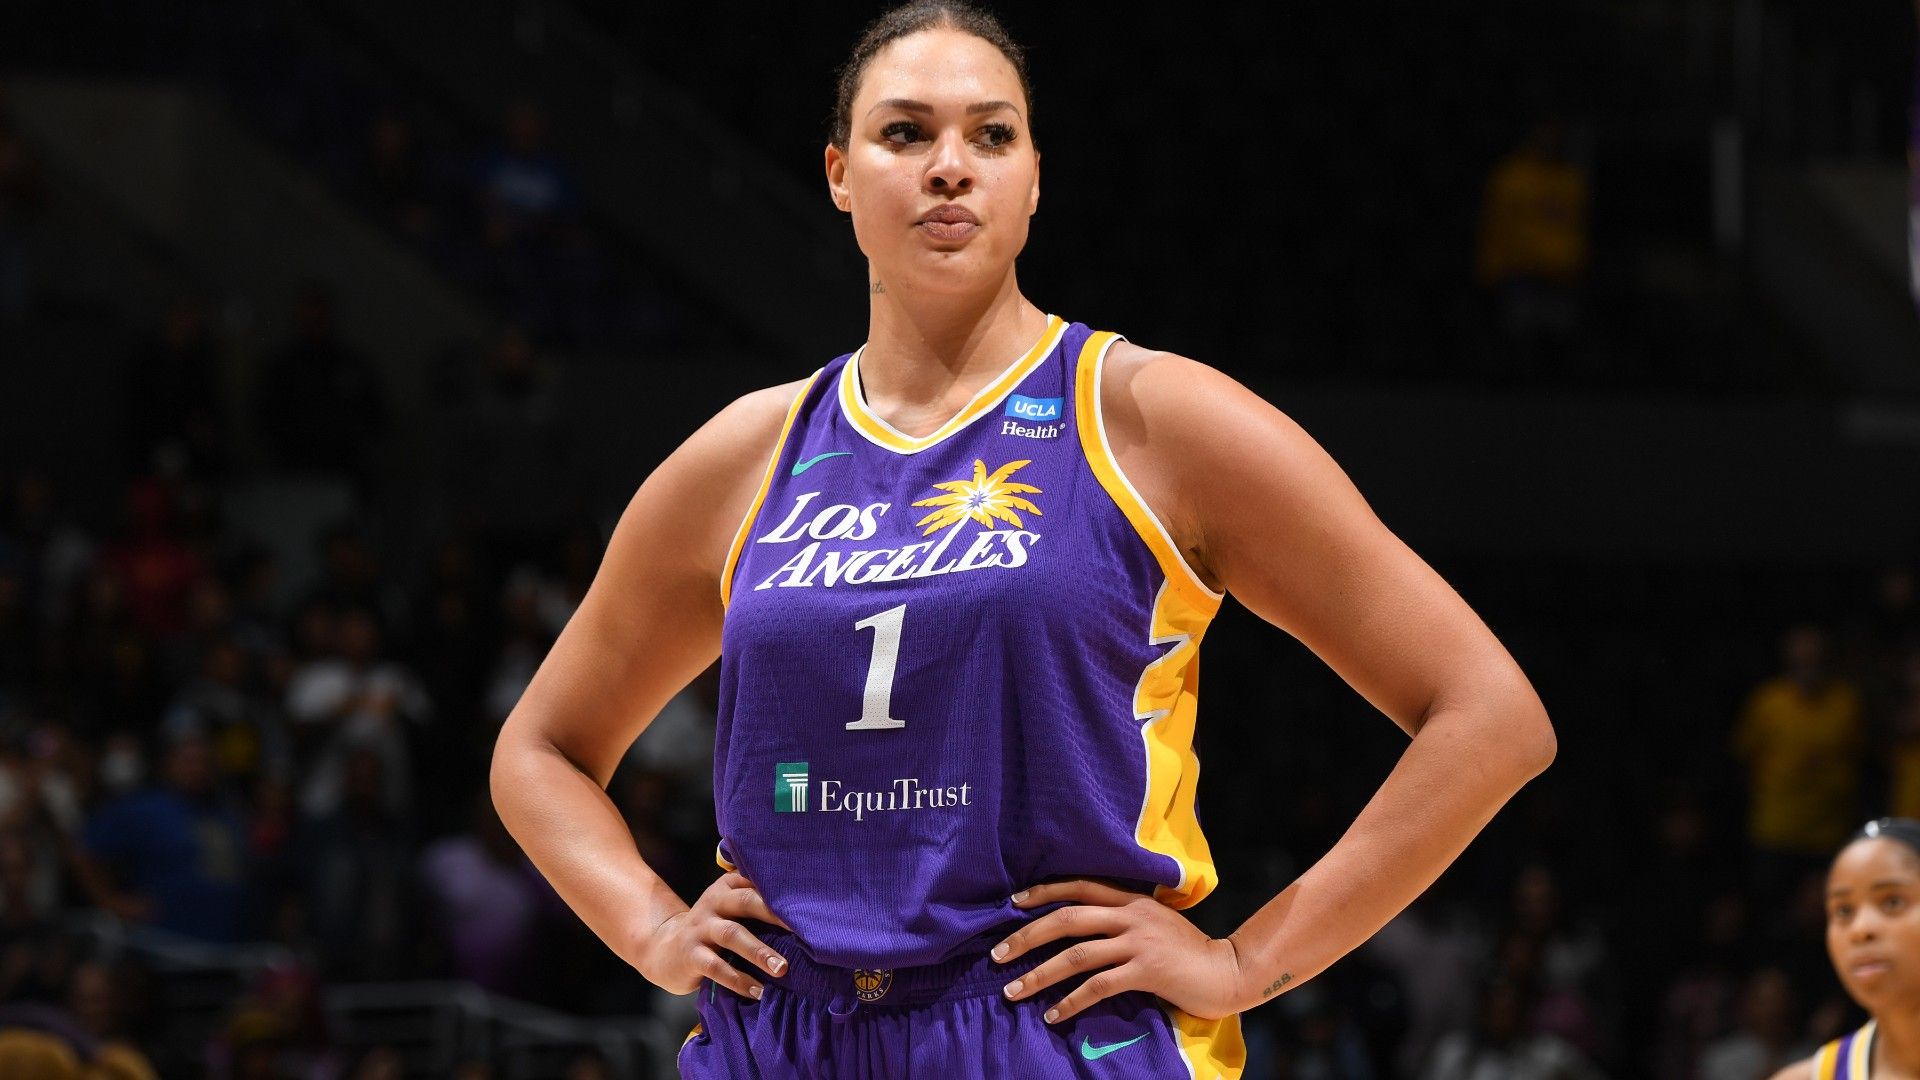 Liz Cambage teases public response to ‘past rumours’ as she steps away from WNBA following ugly split – Wide World of Sports